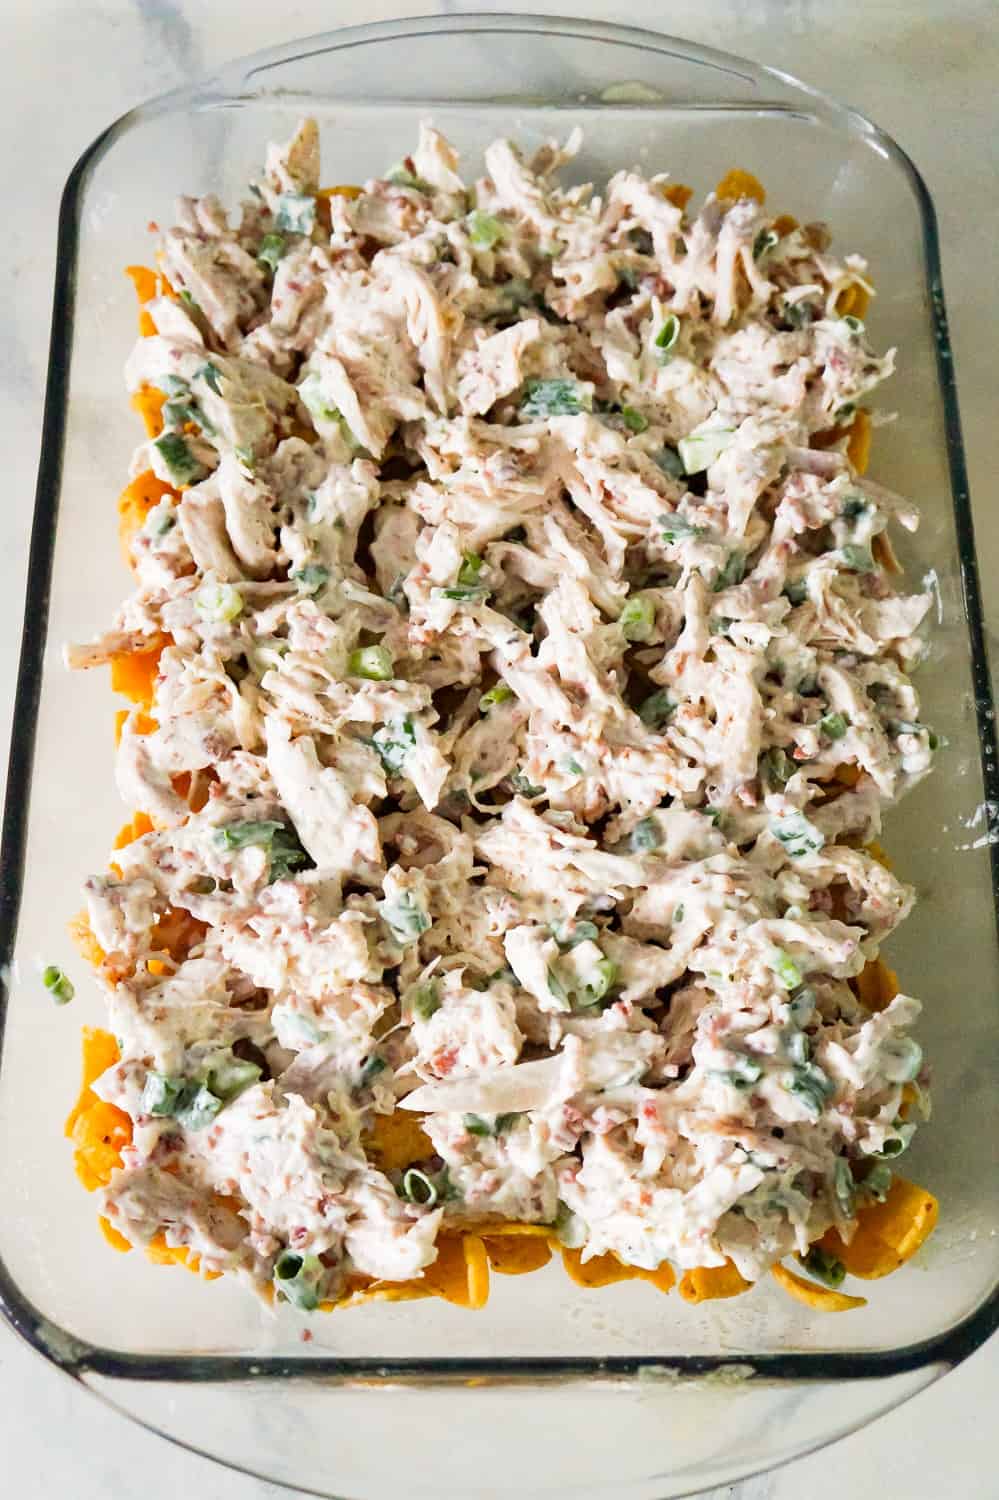 chicken bacon ranch mixture on top of Frito's corn chips in a baking dish